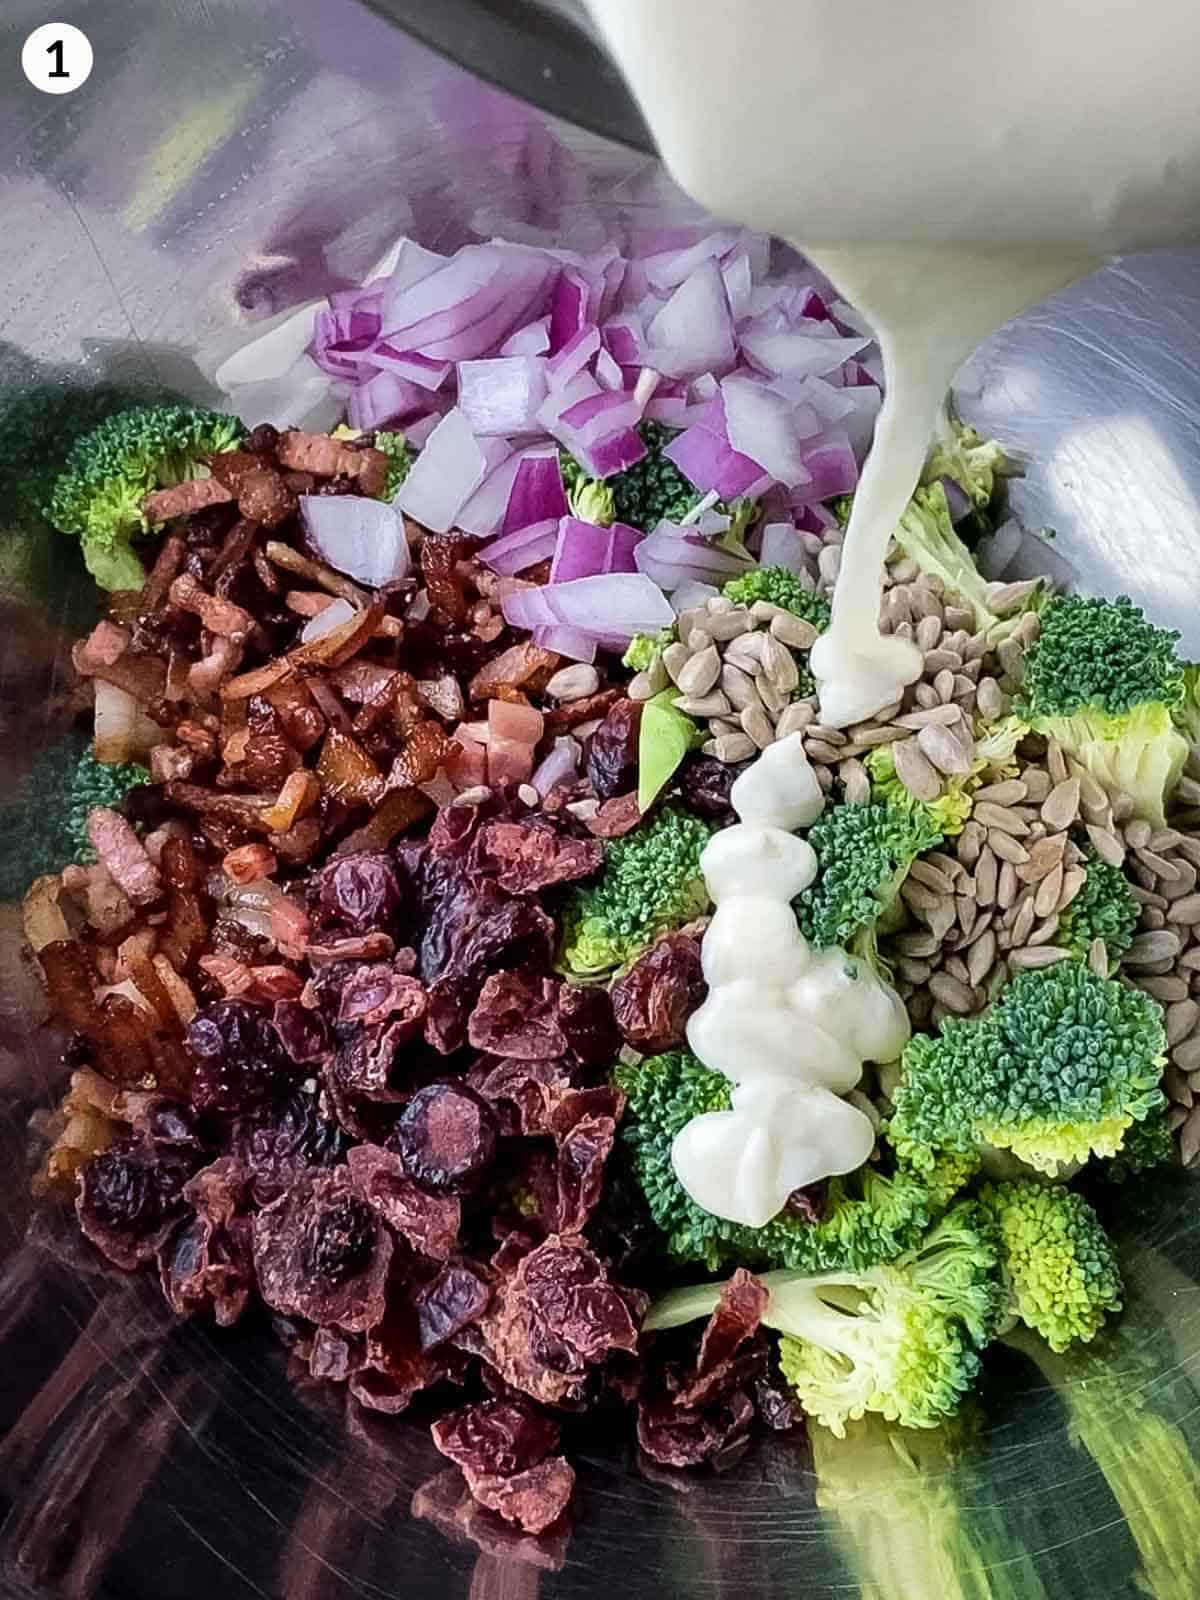 Broccoli, bacon, seeds, dried cranberries and onions in a mixing bowl